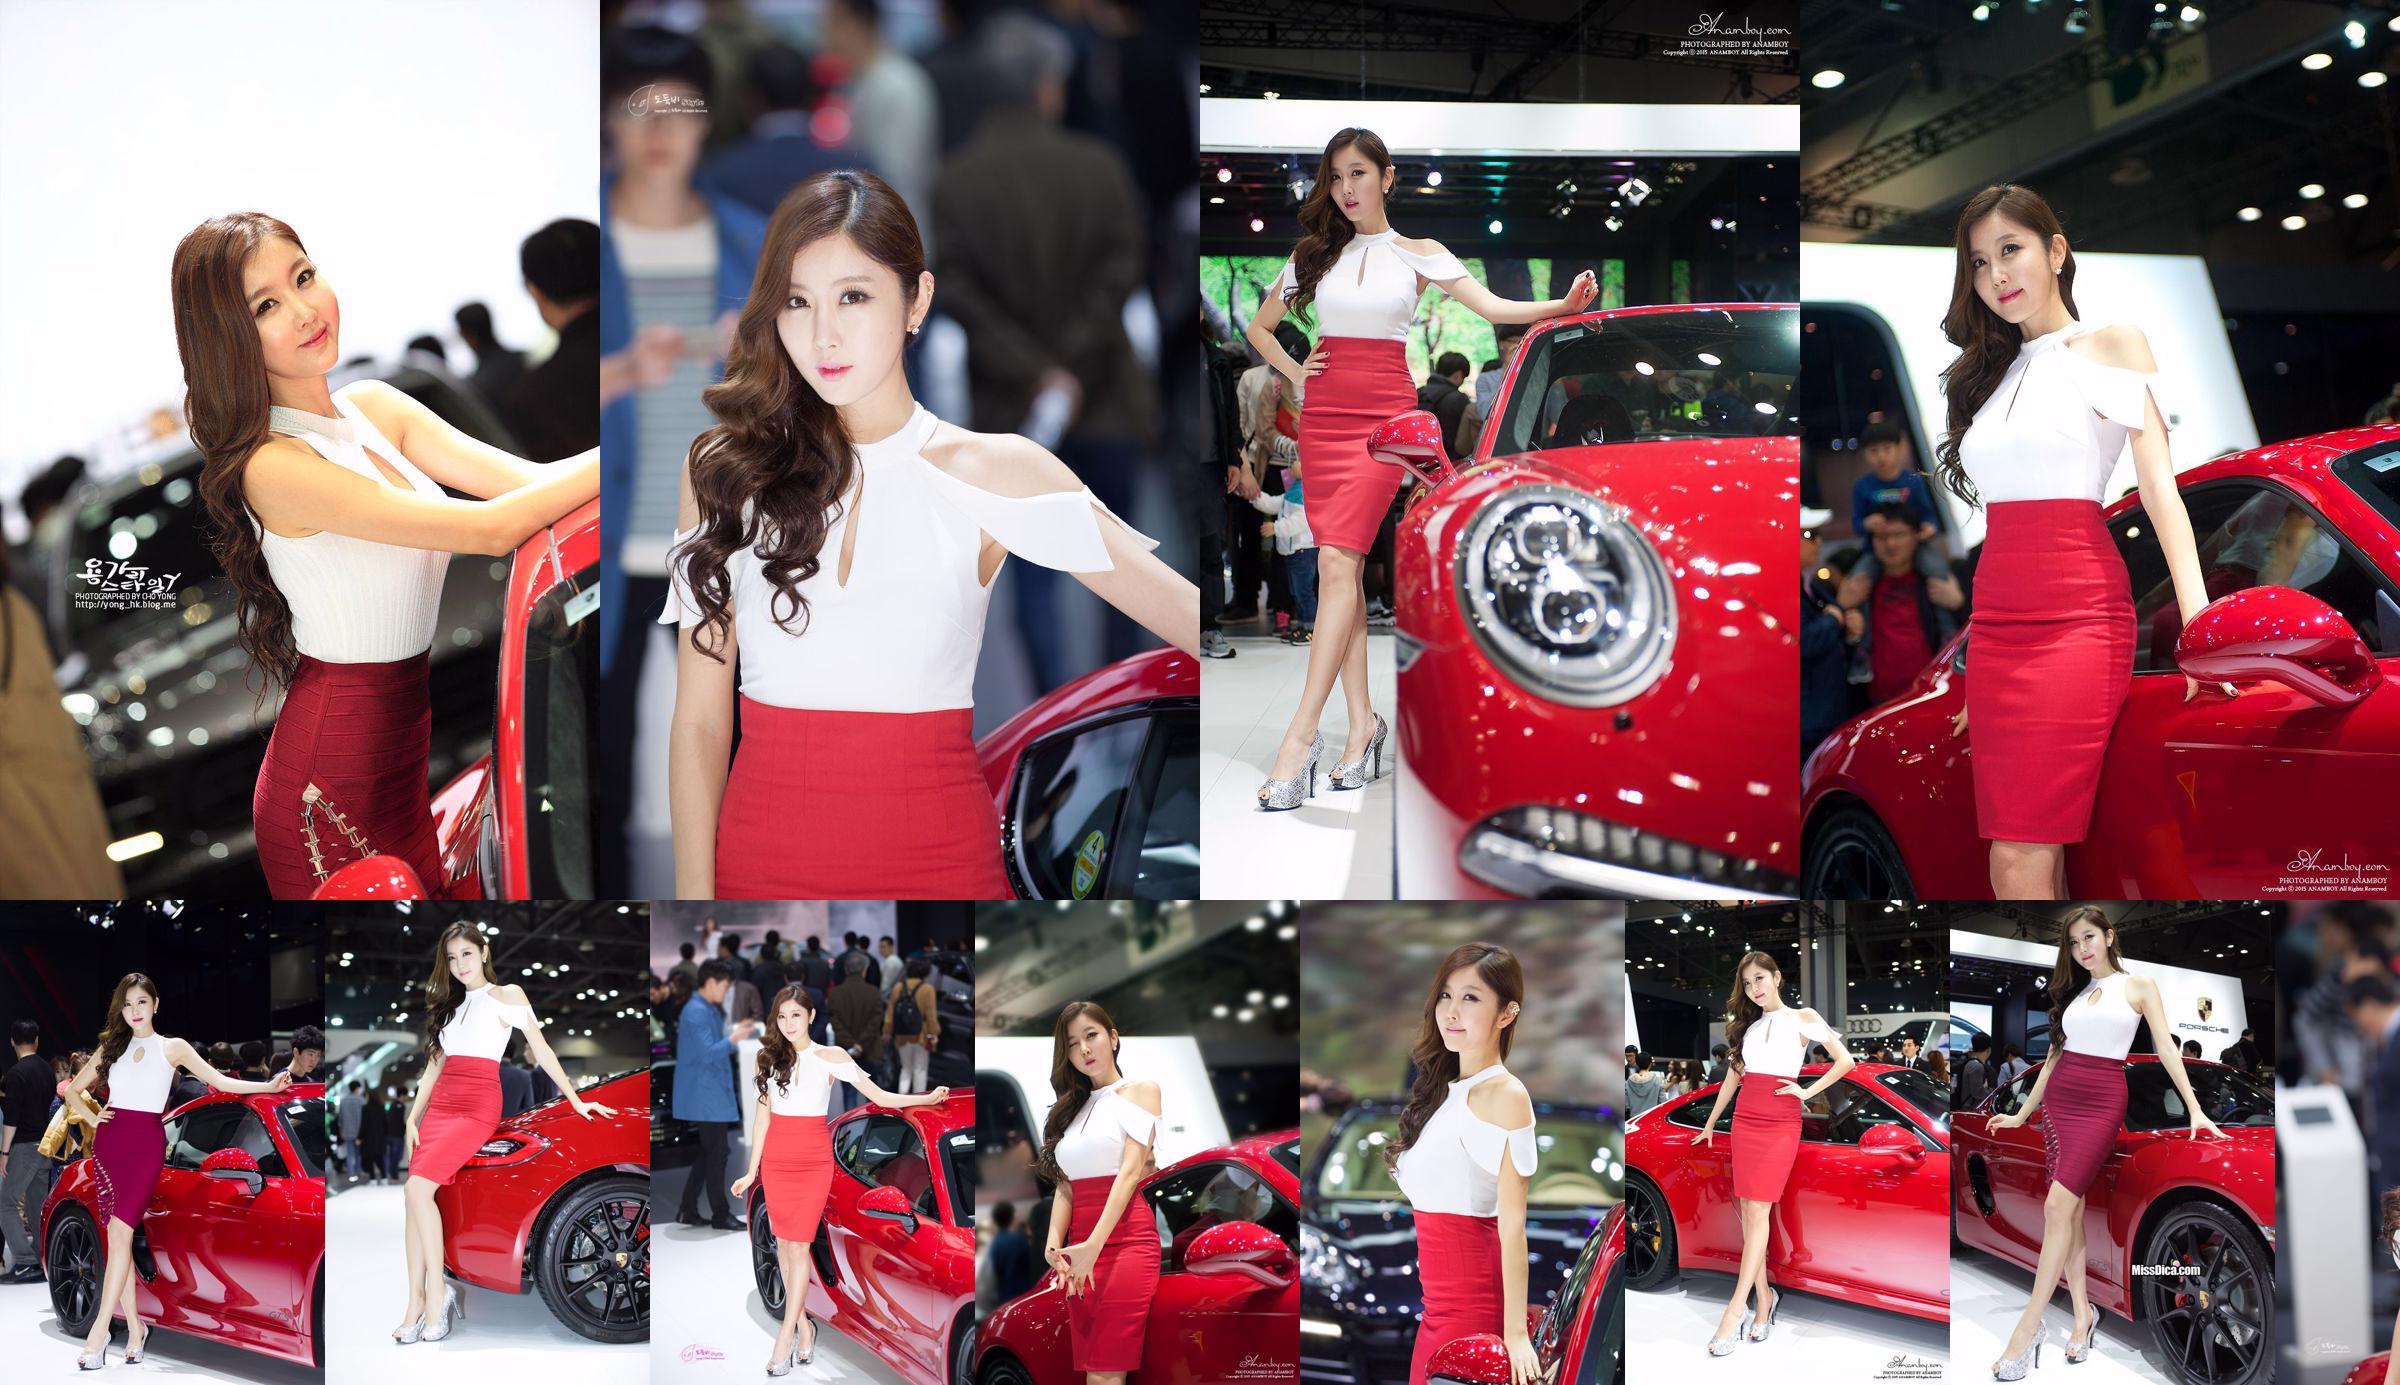 Photo Collection of Korean Car Model Cui Xingya/Cui Xinger's "Red Skirt Series at Auto Show" No.715d39 Page 3